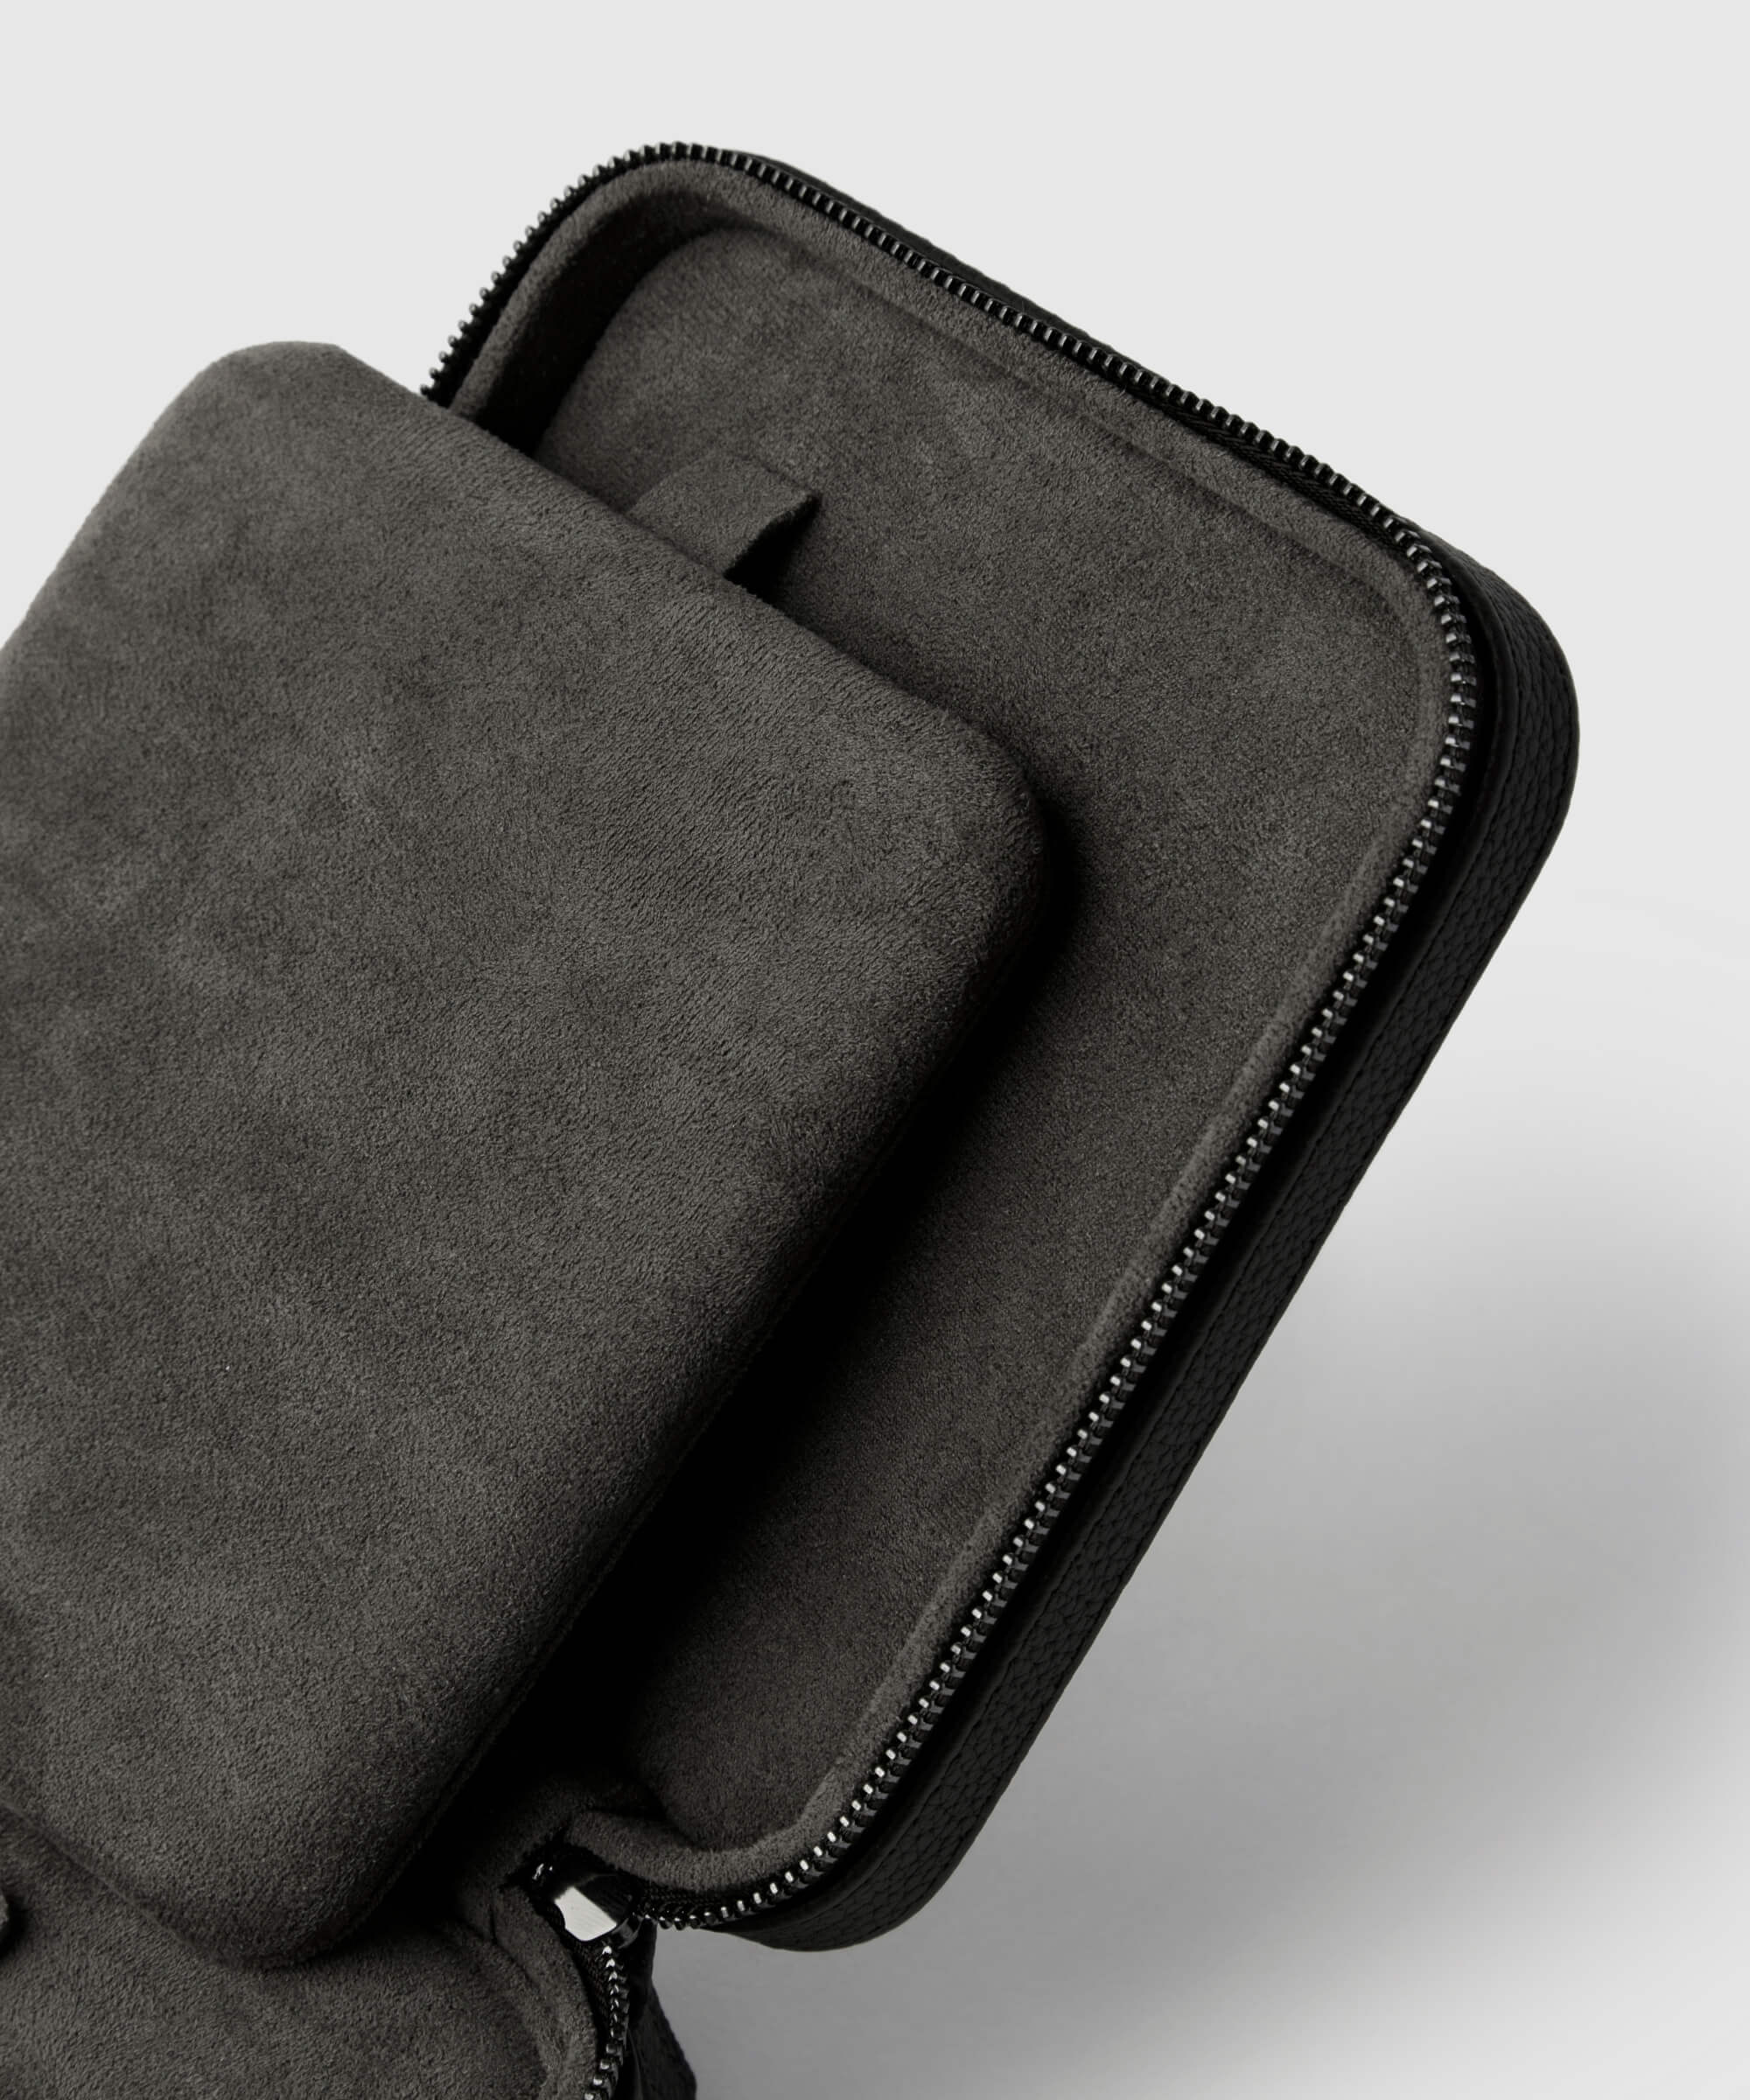 A TAWBURY Fraser 2 Watch Travel Case with Storage - Black, with a zippered compartment, designed for functionality and protection of watches.